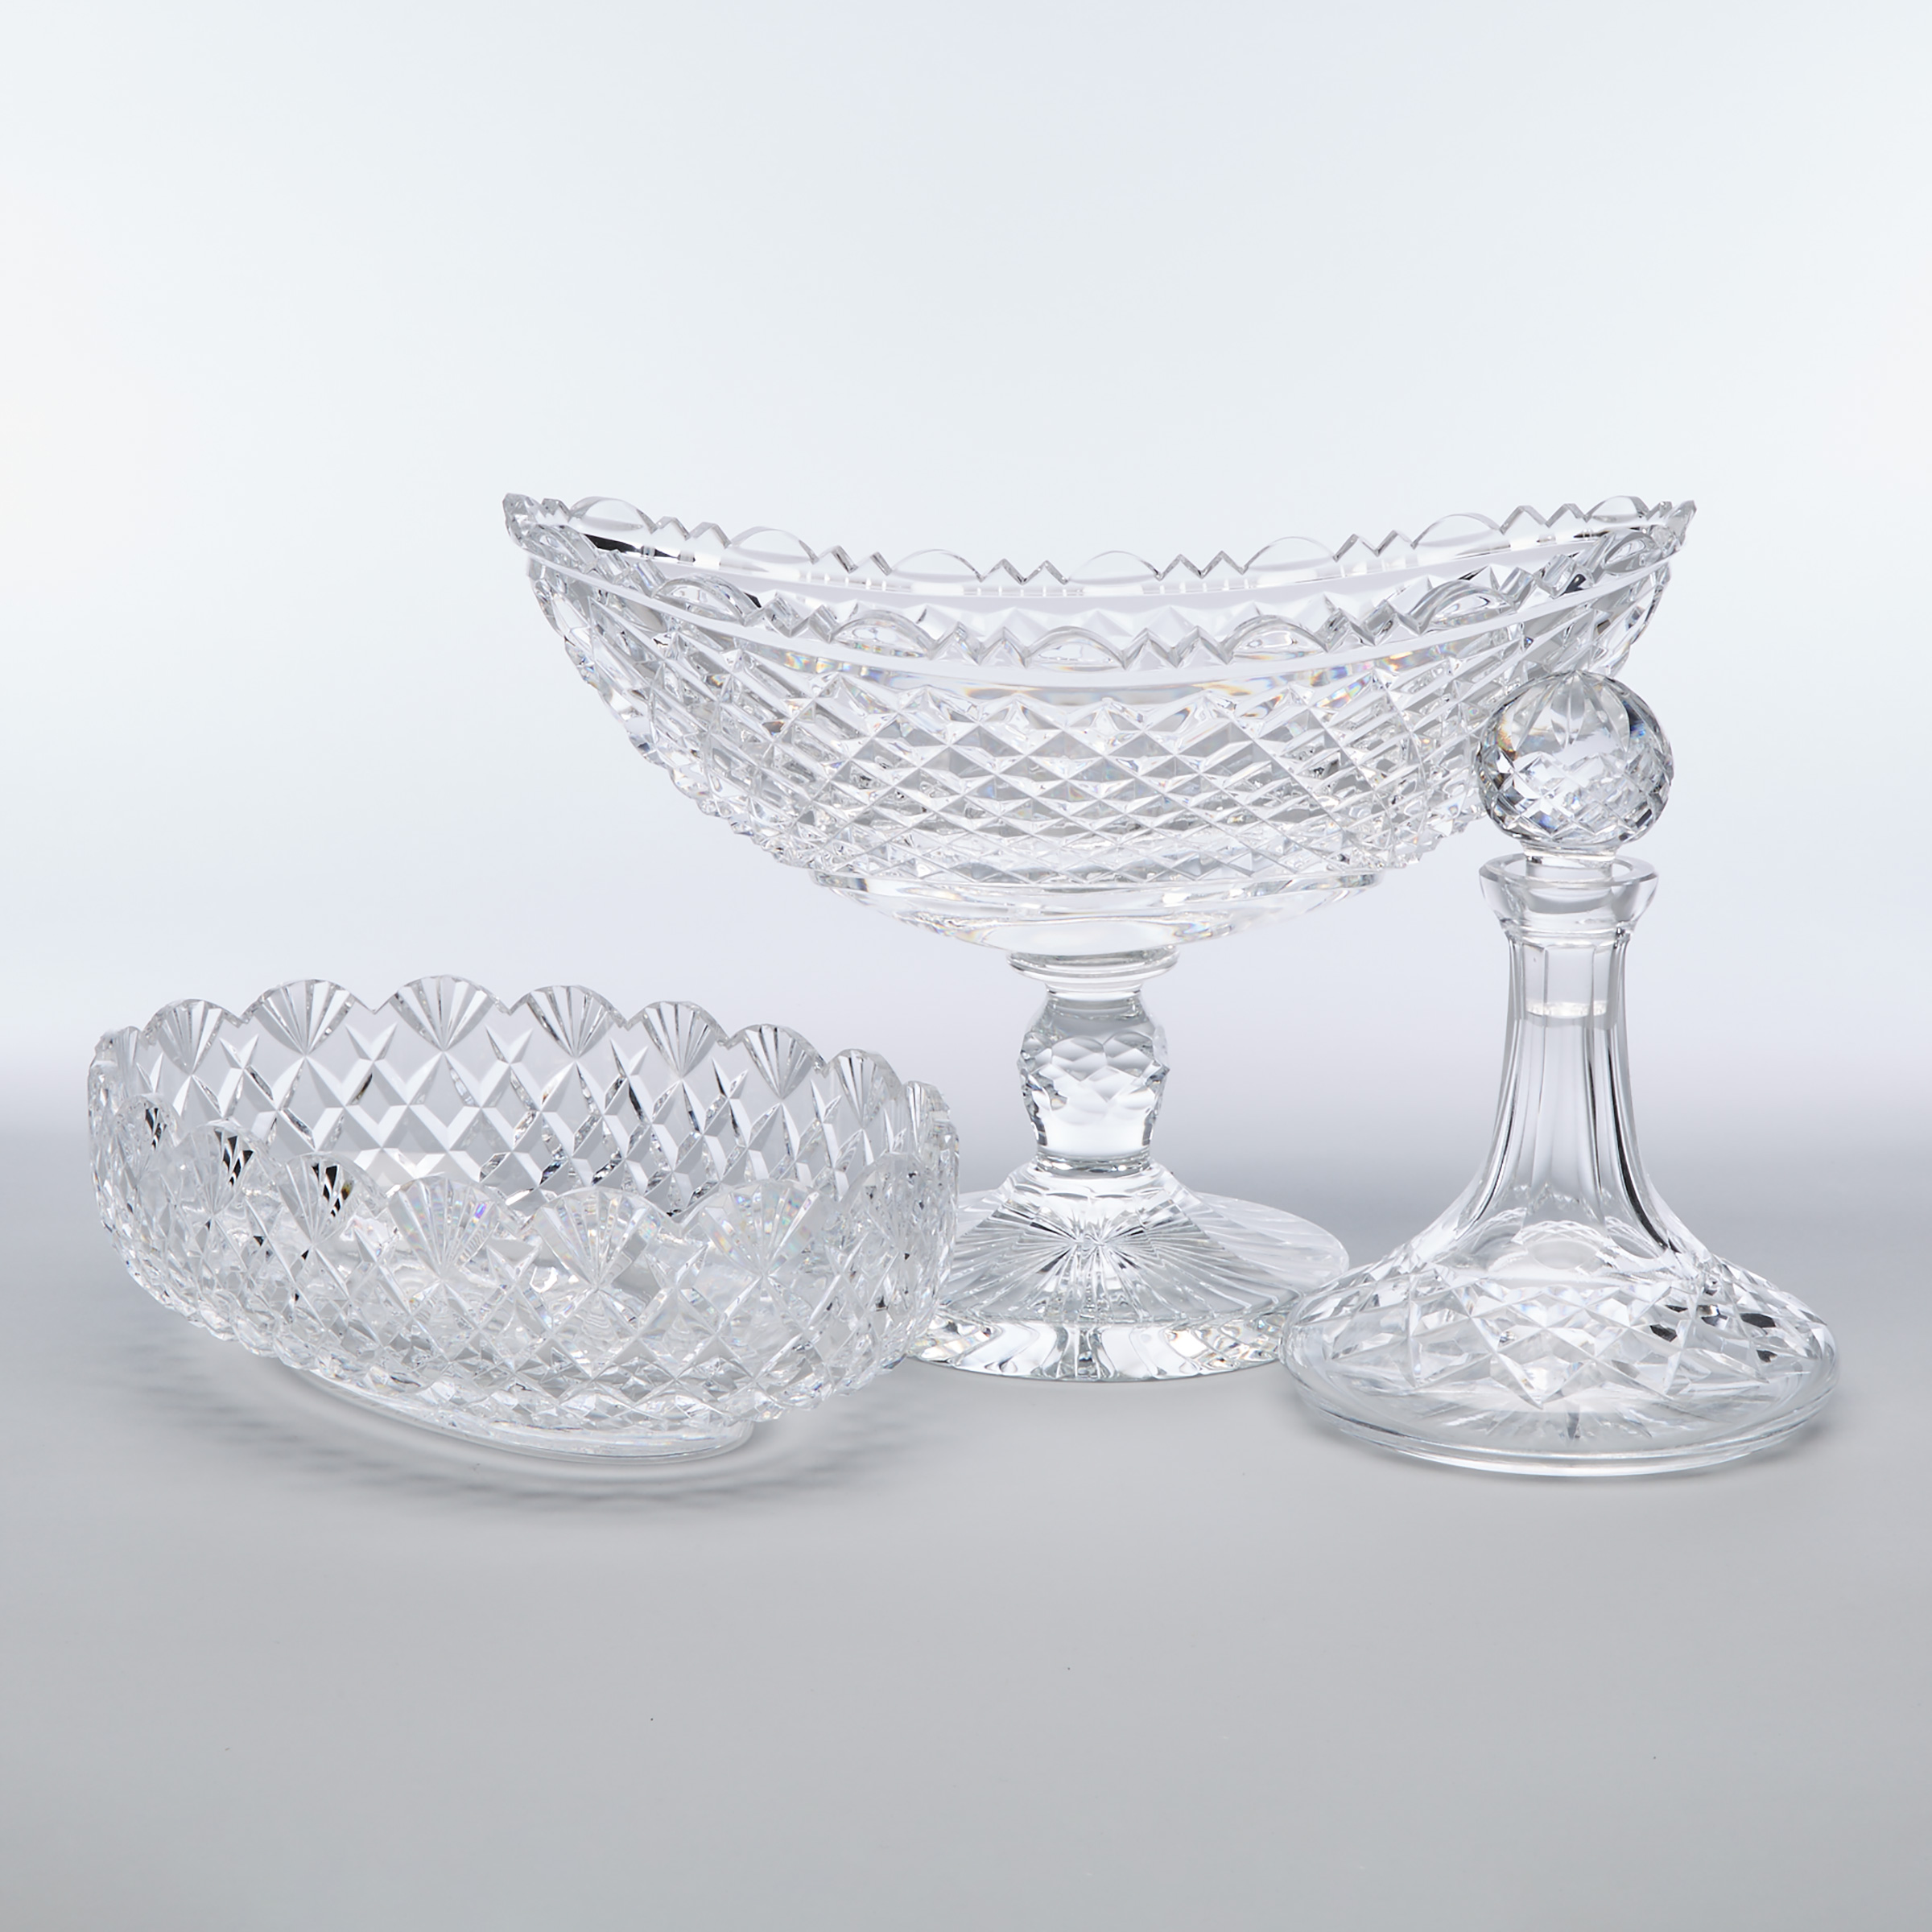 Waterford Cut Glass Oval Bowl, Footed Bowl and a Decanter, 20th century